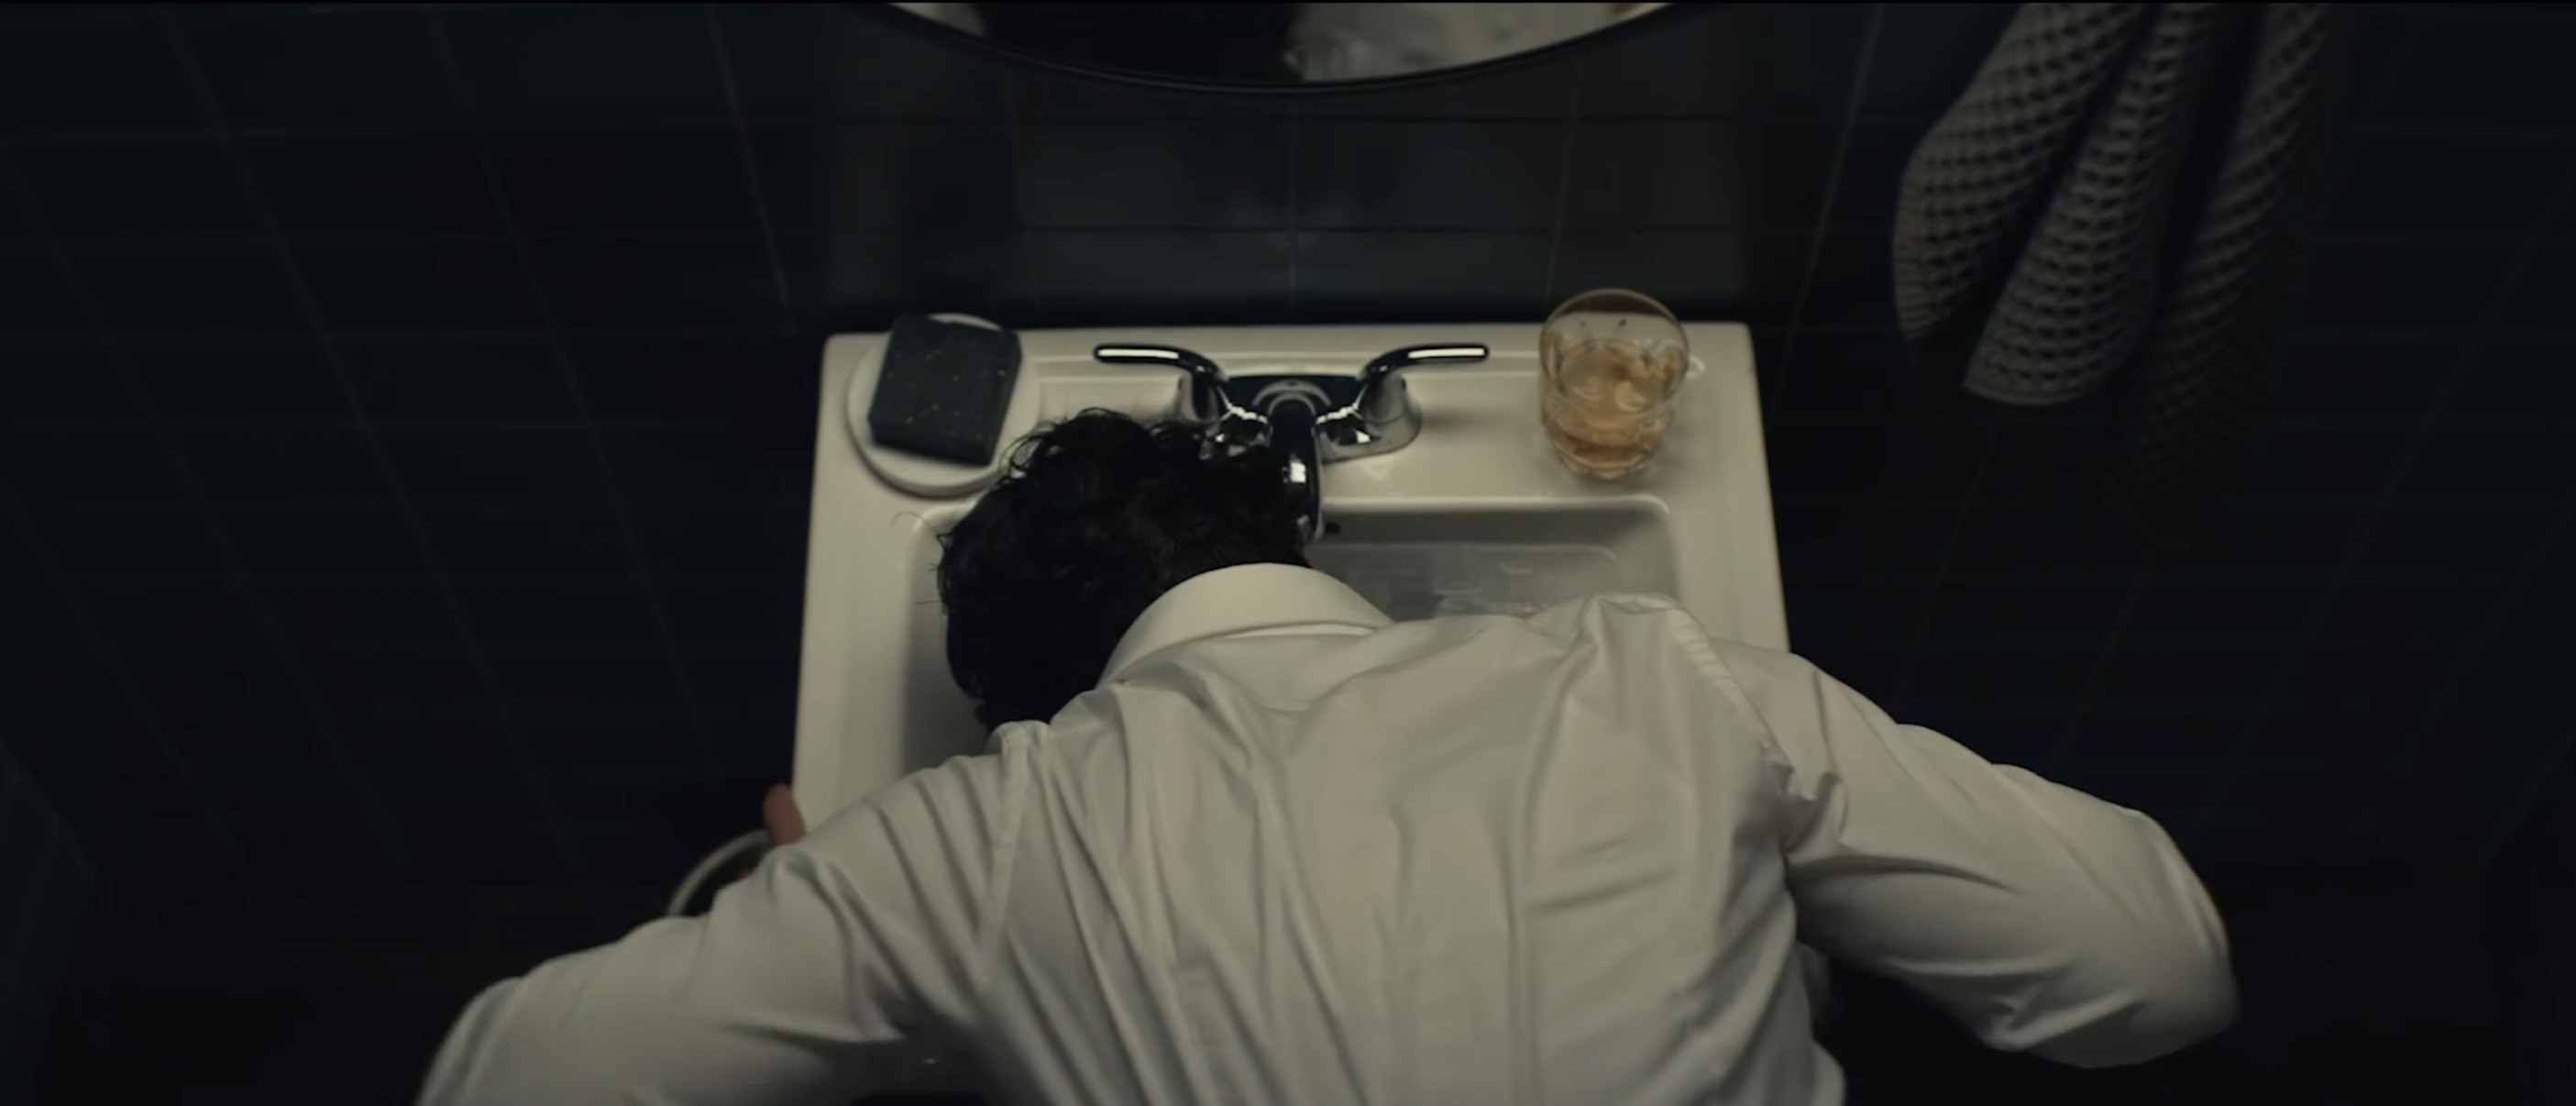 The pop star recently shared a clip from the music video, showing a guy sticking his head in a sink full of ice